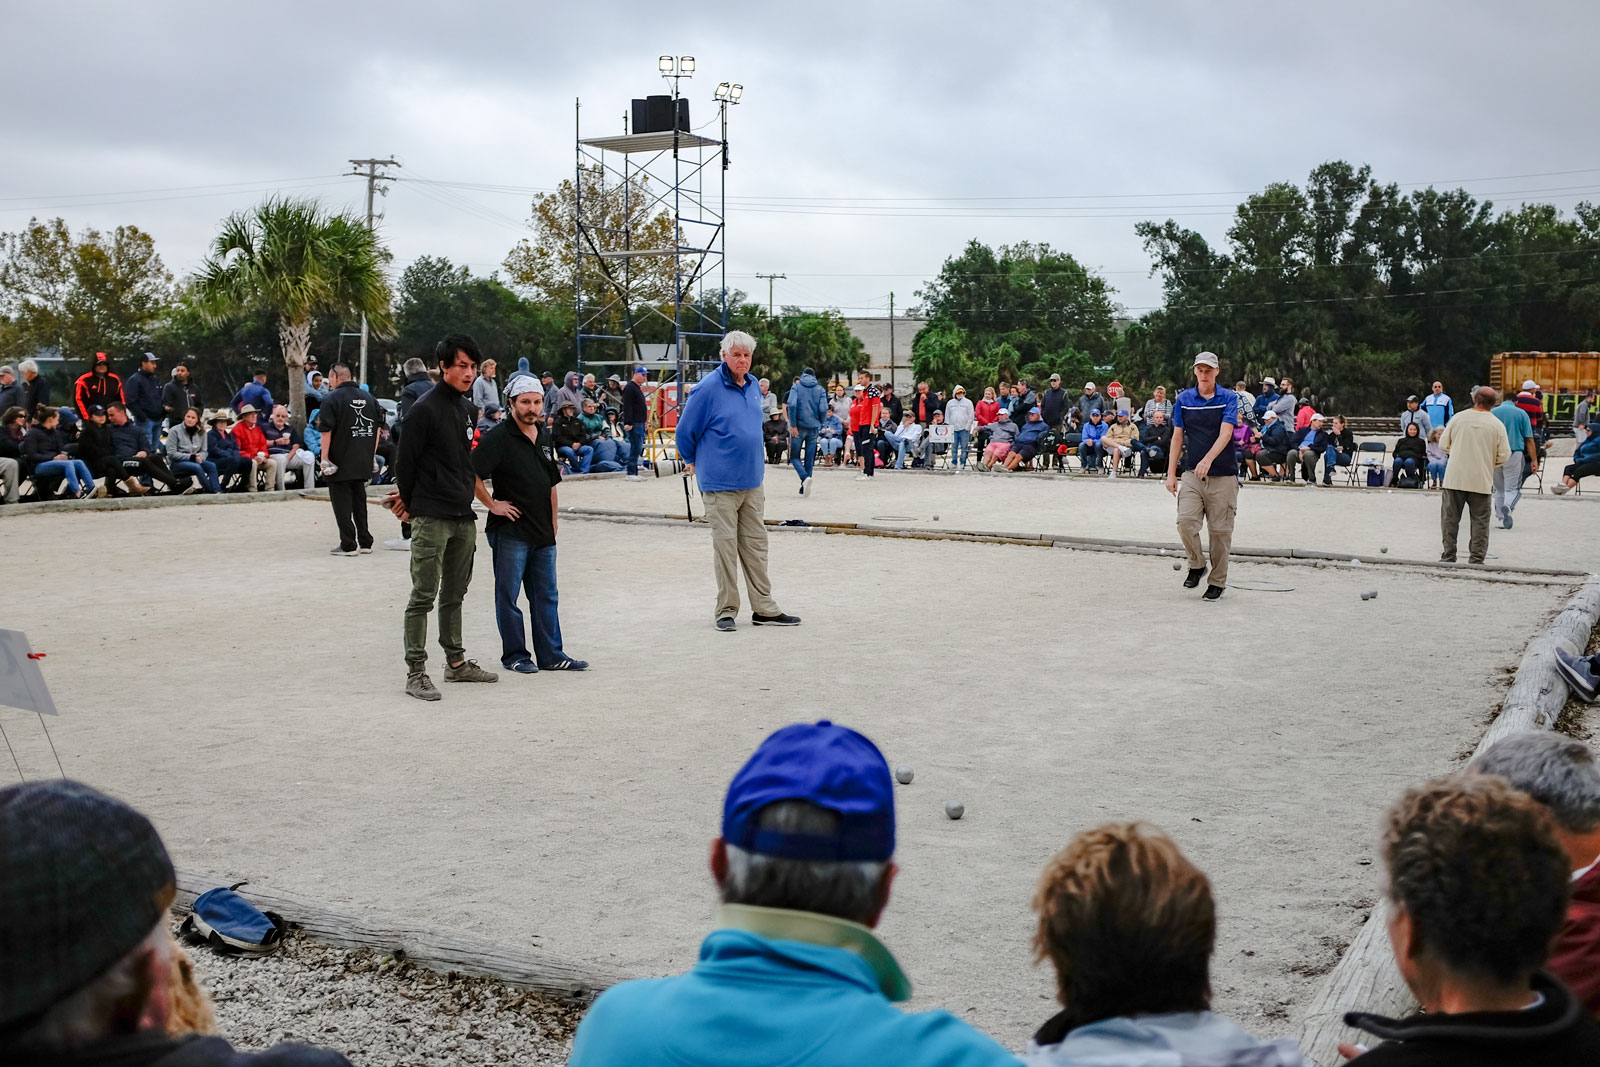 A petanque game in action at Amelia Island